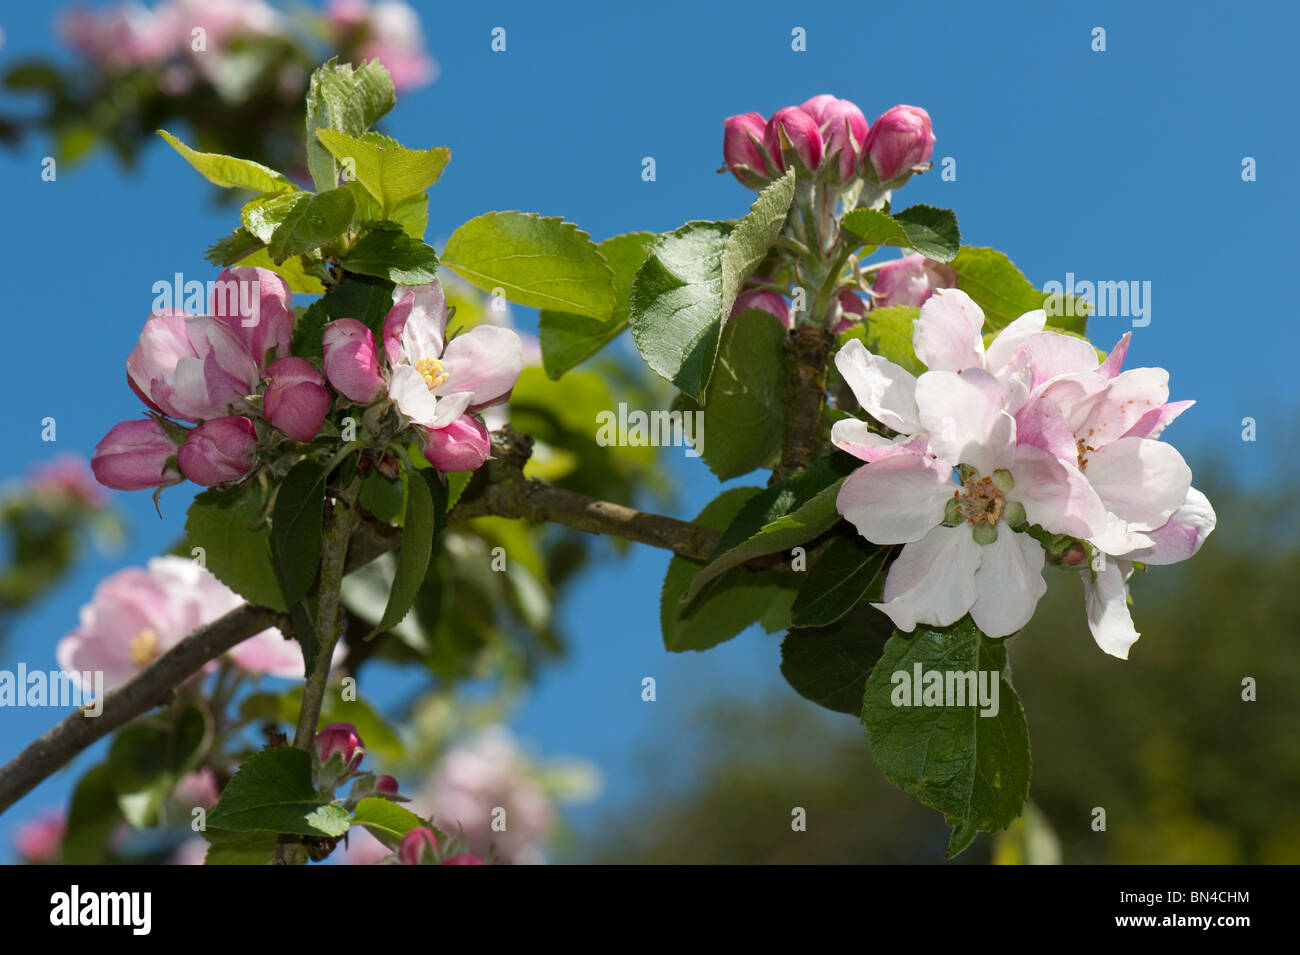 Flowers And Buds On A Bramley Apple Tree In Spring Stock Photo Alamy